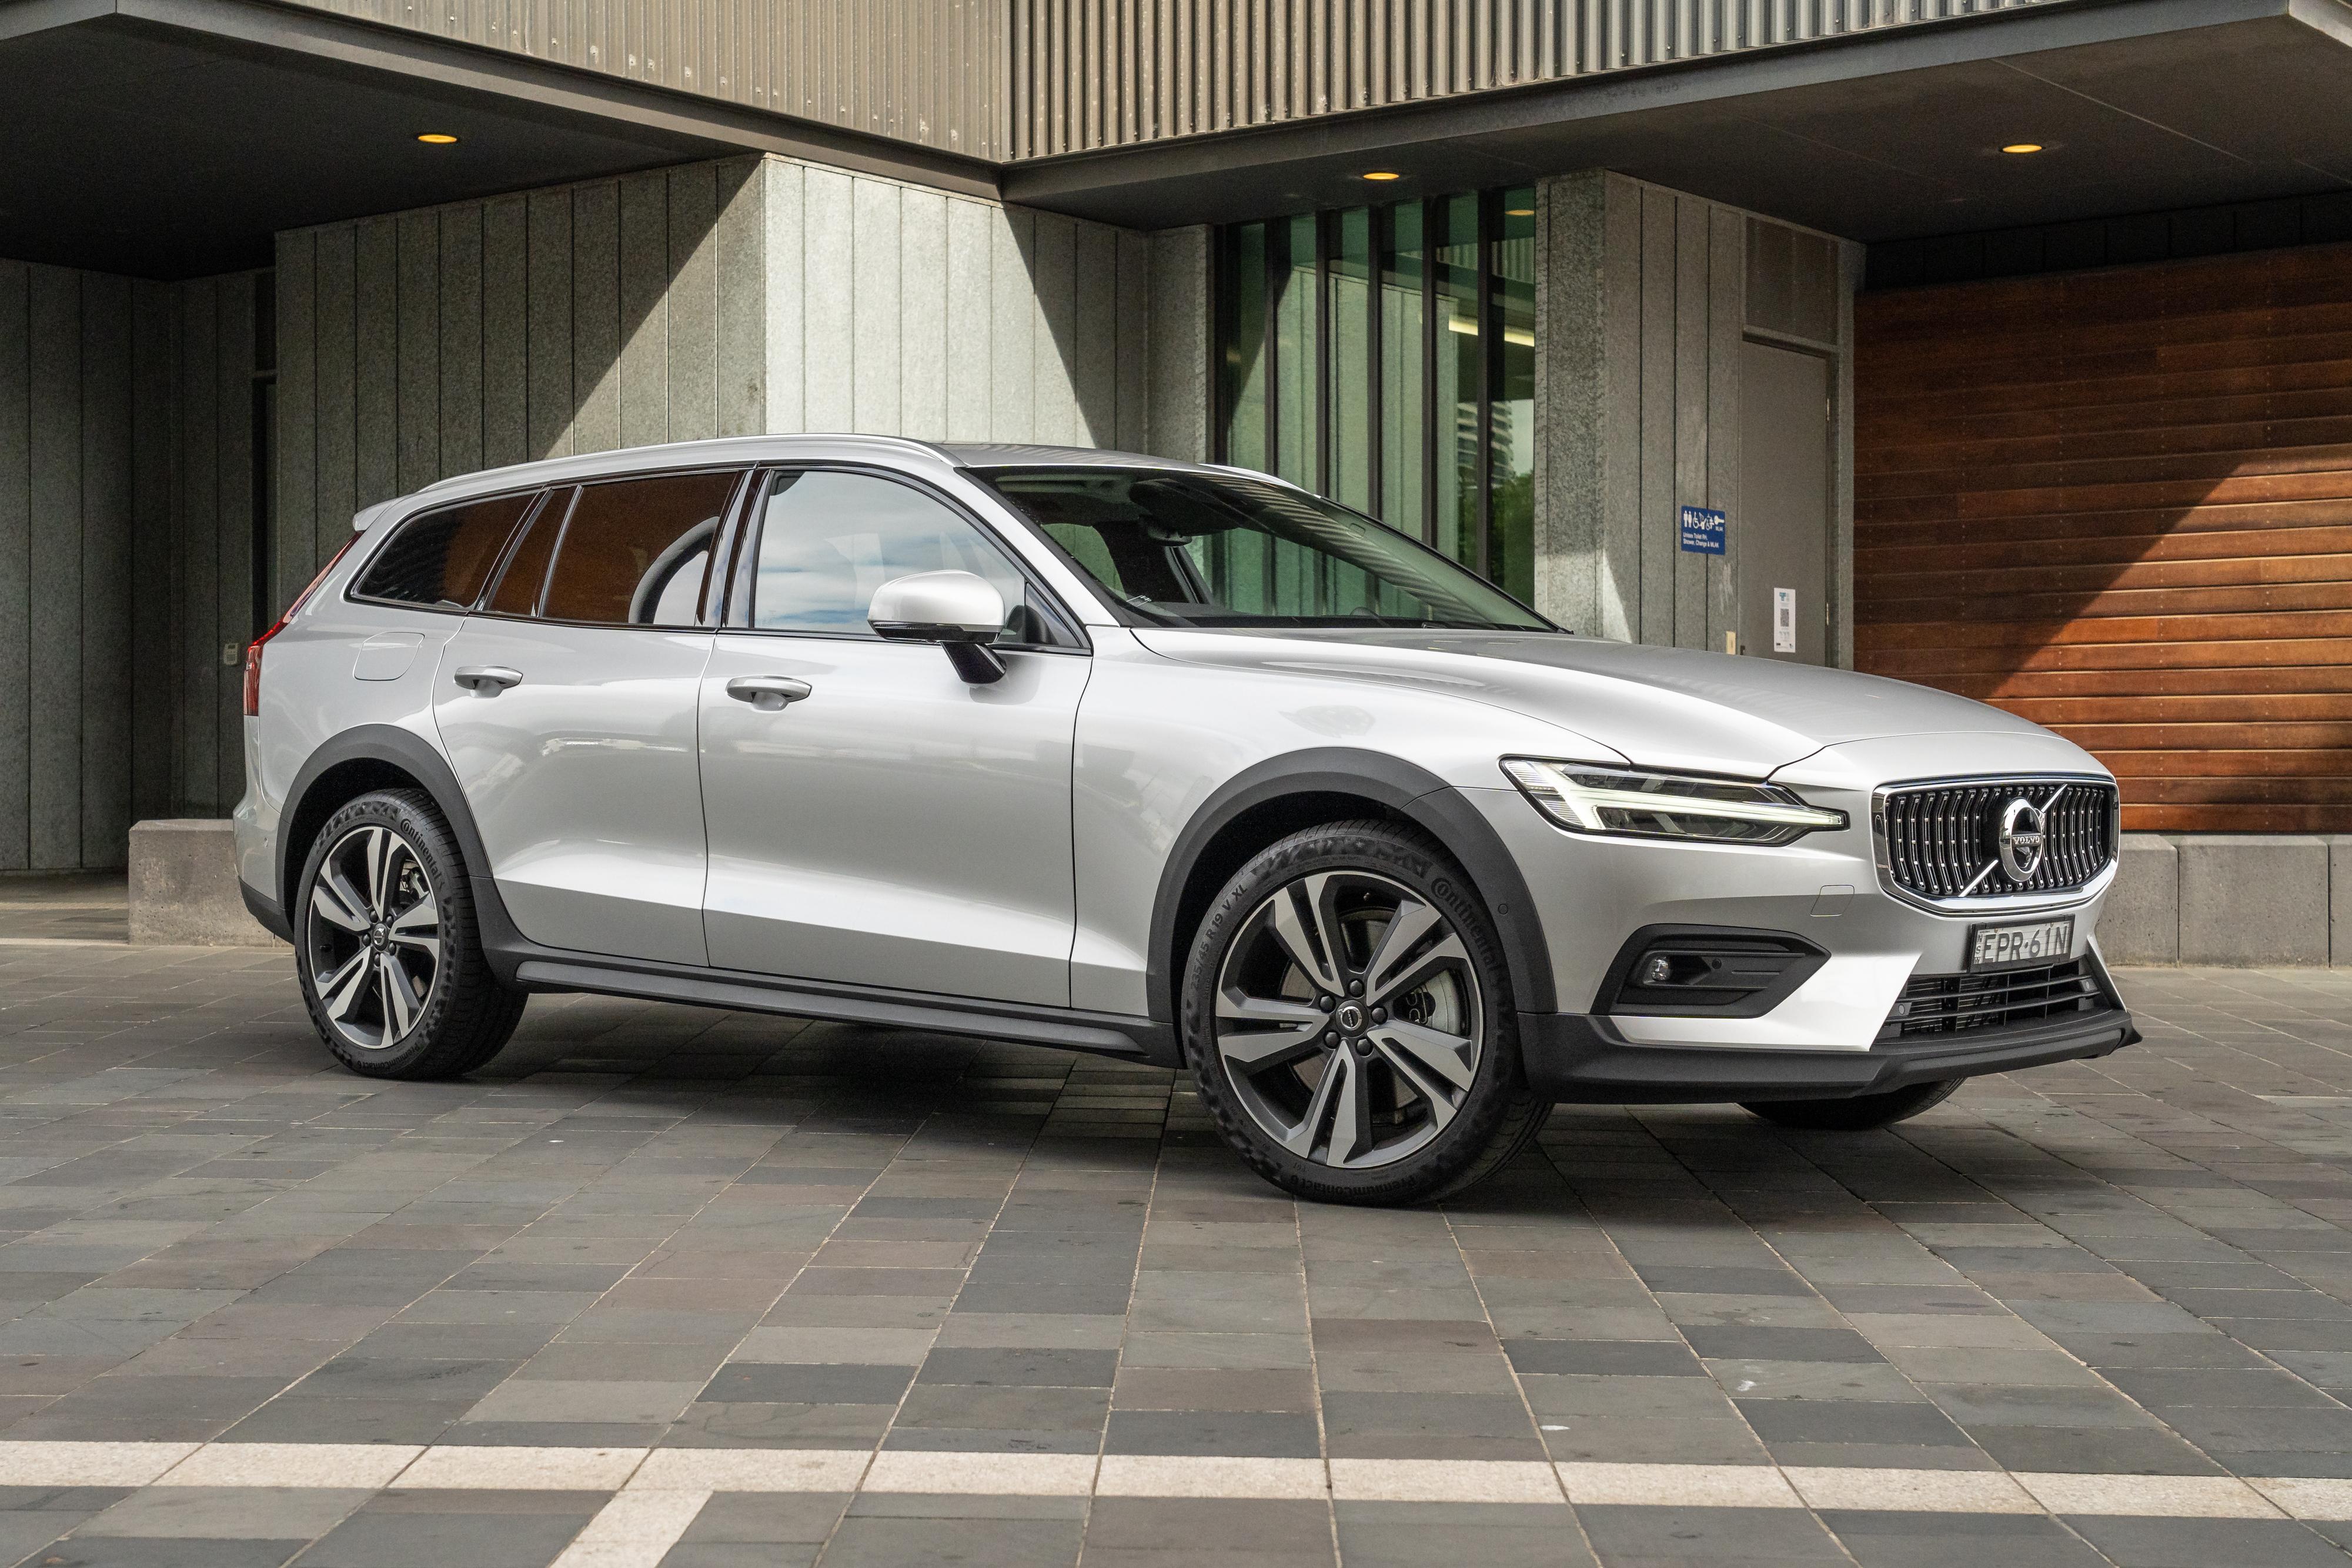 Volvo V60 Cross Country Wagon: Models, Generations and Details